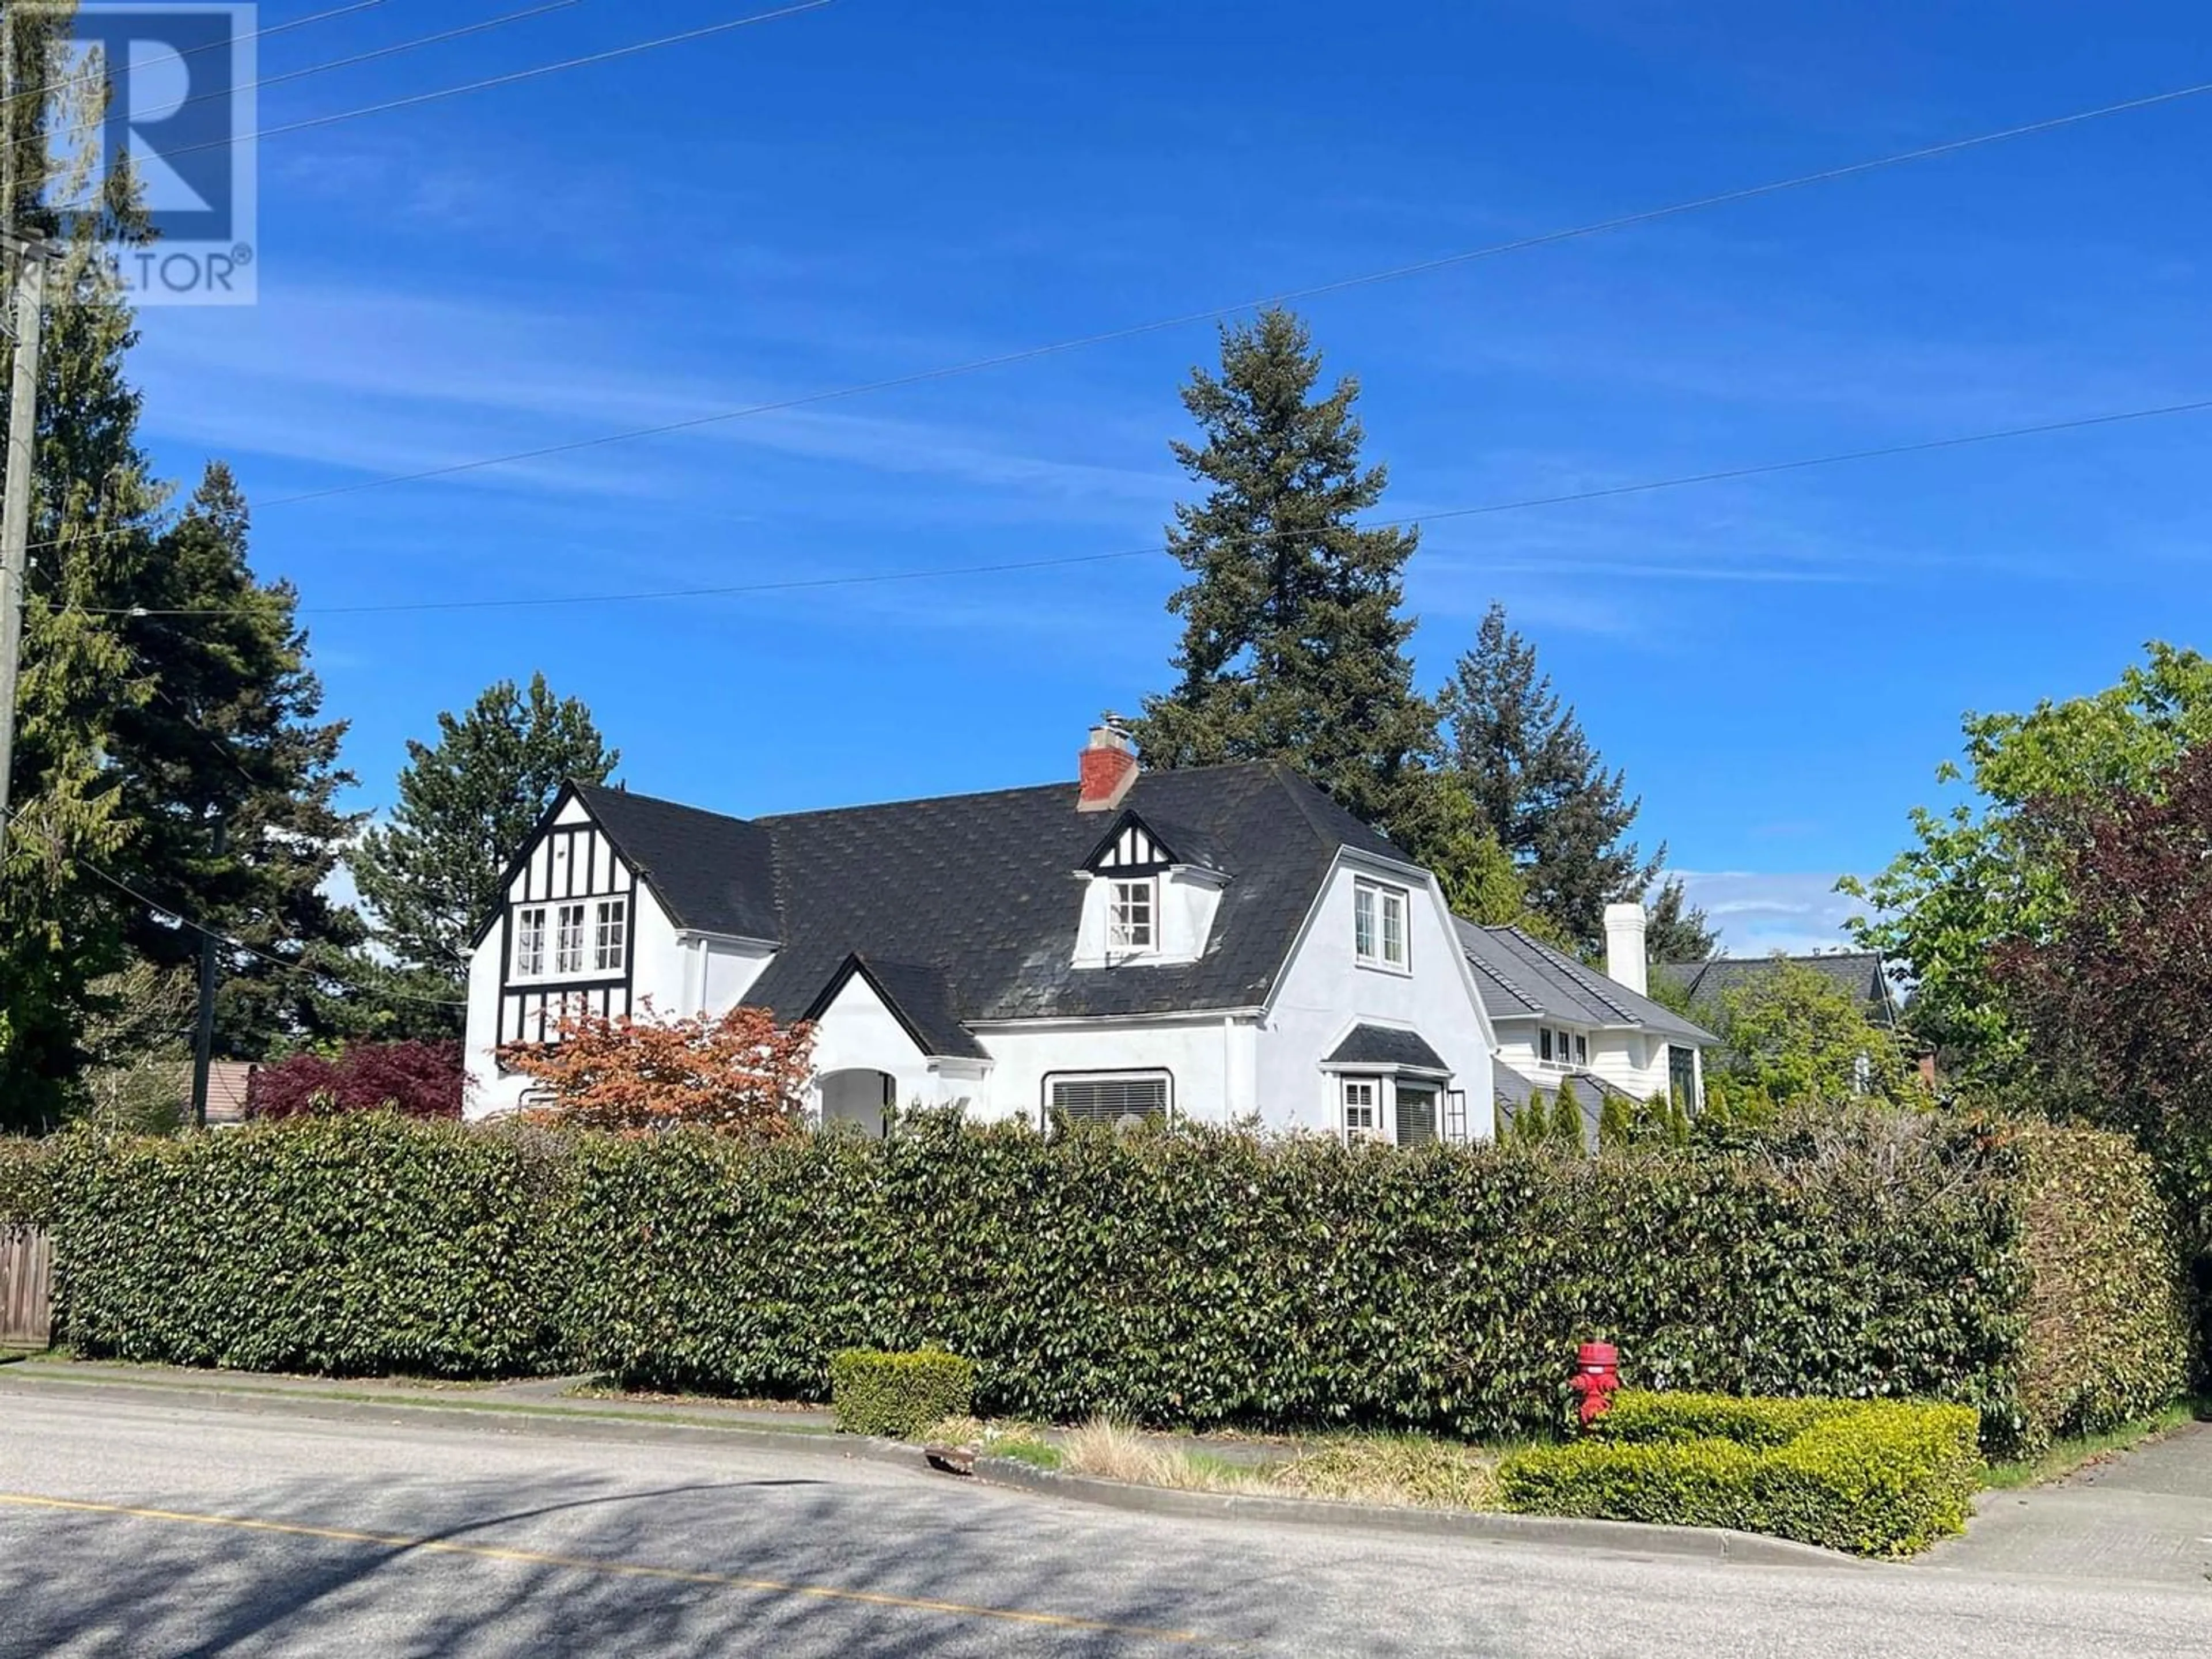 Outside view for 5286 MACKENZIE STREET, Vancouver British Columbia V6N1G9